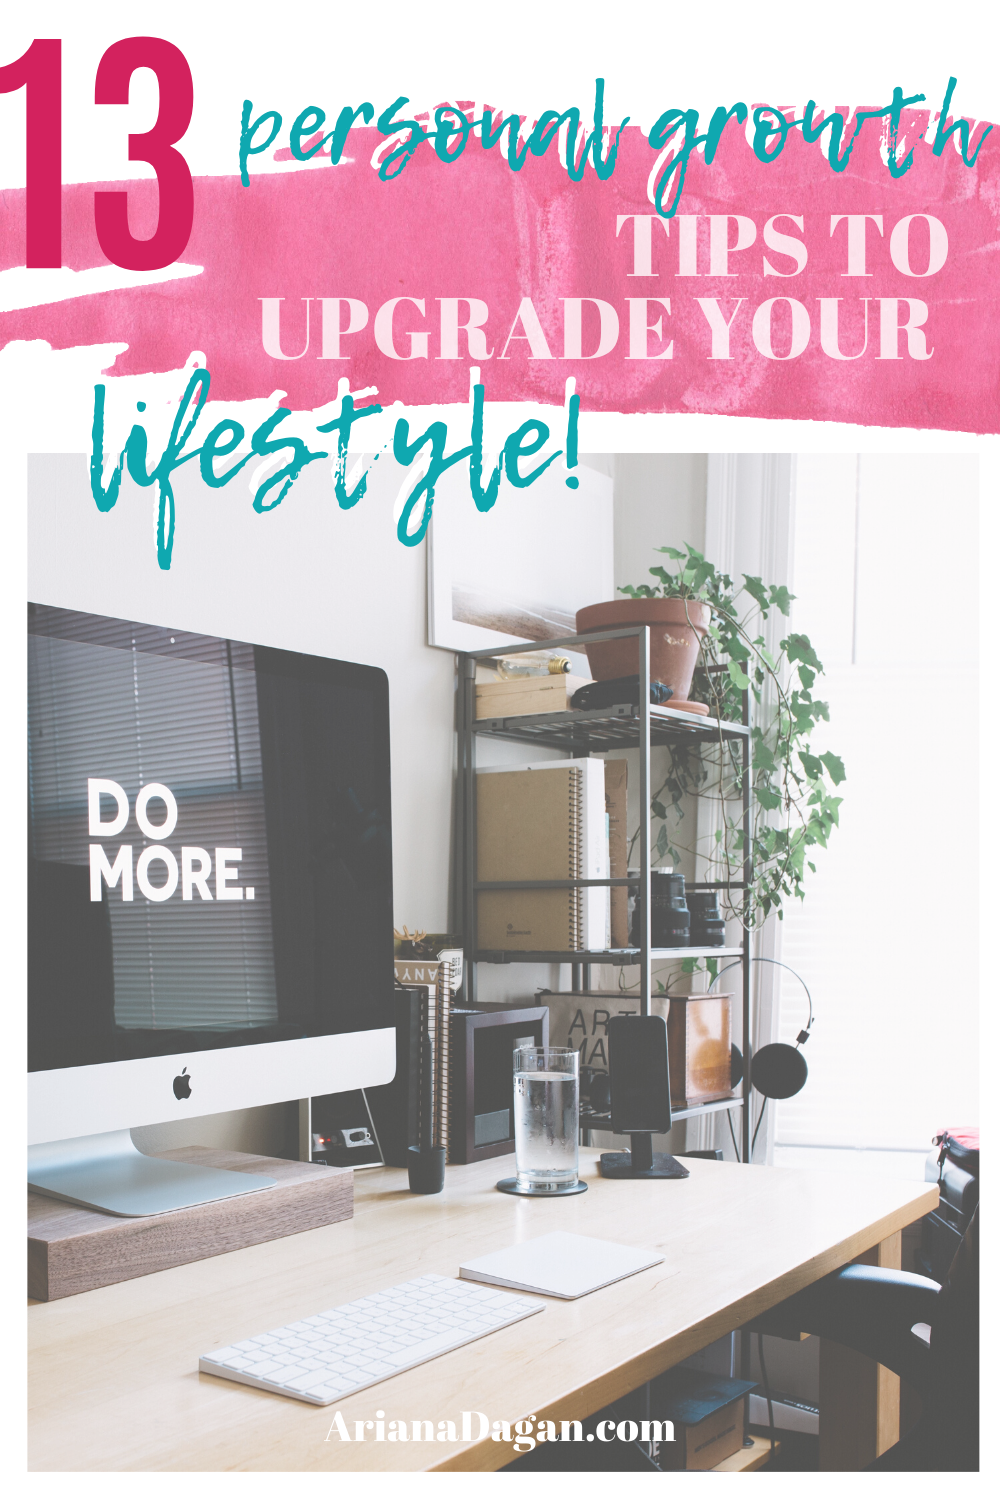 13 Tips to Upgrade Your Lifestlye and Improve Your Quality of Life by Ariana Dagan